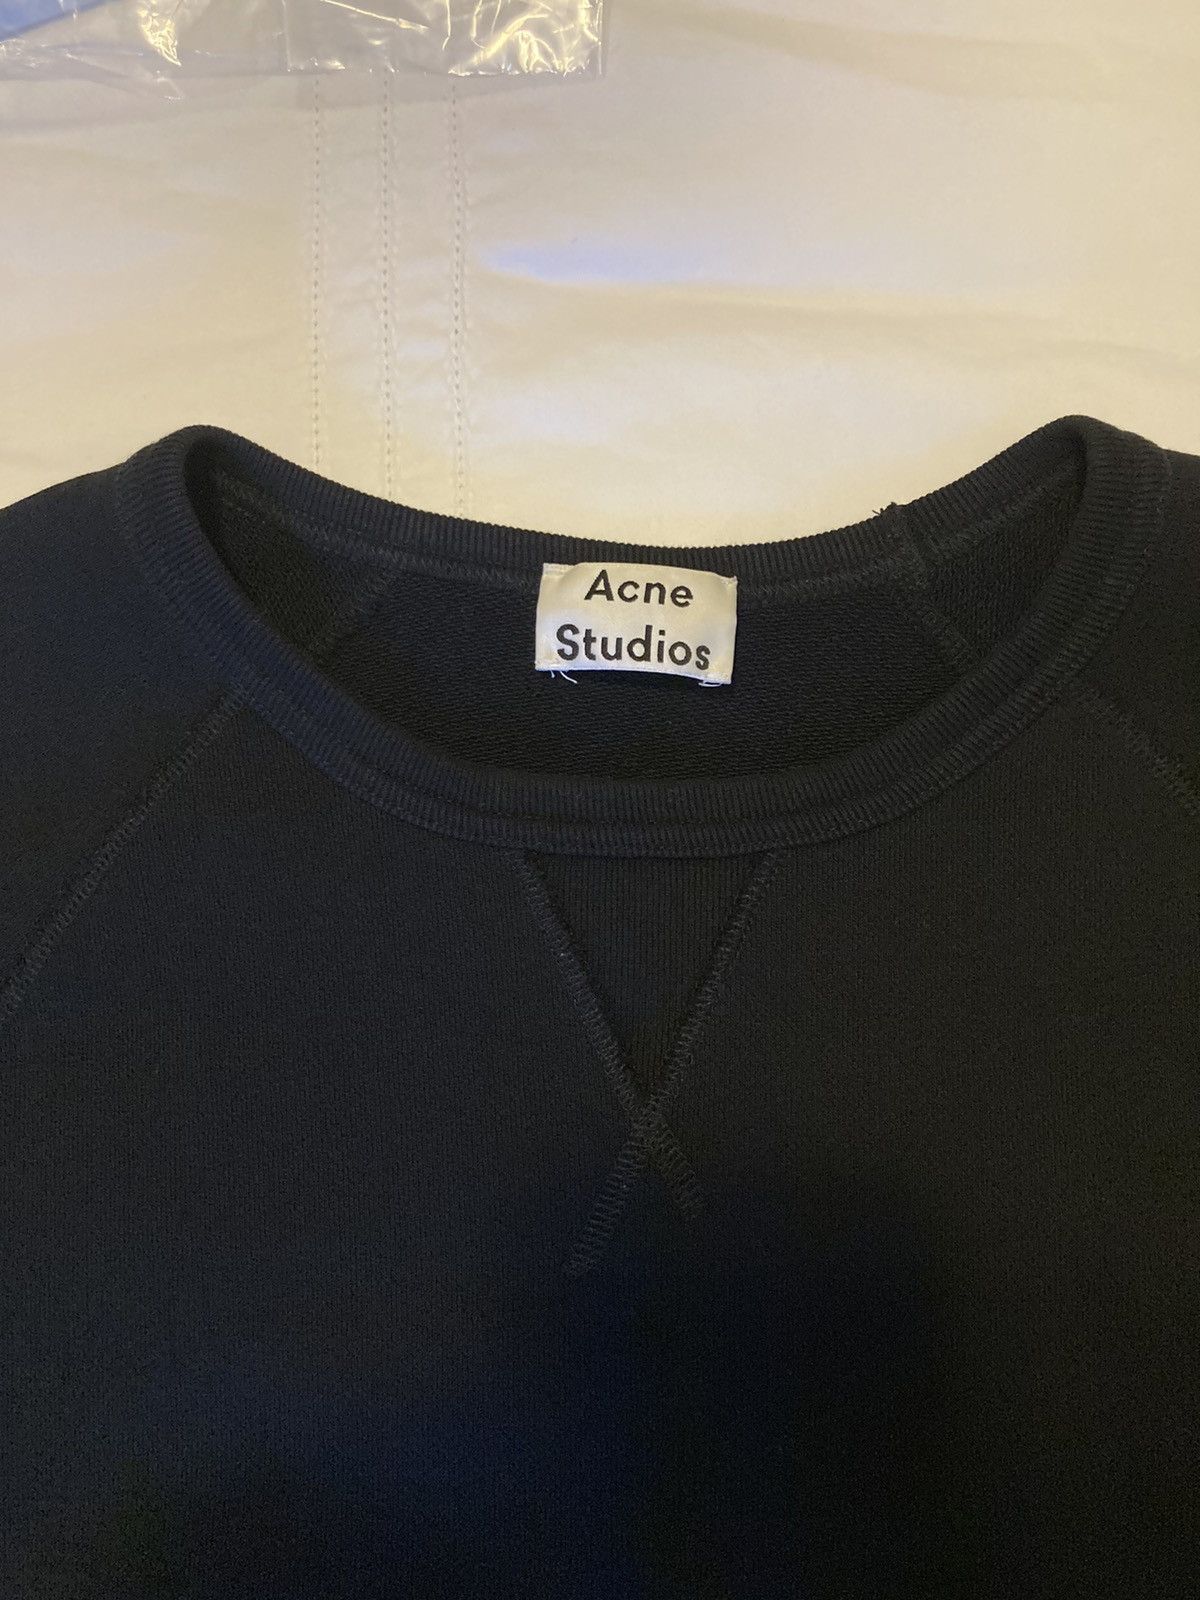 Acne Studios College Sweater AW14 | Grailed